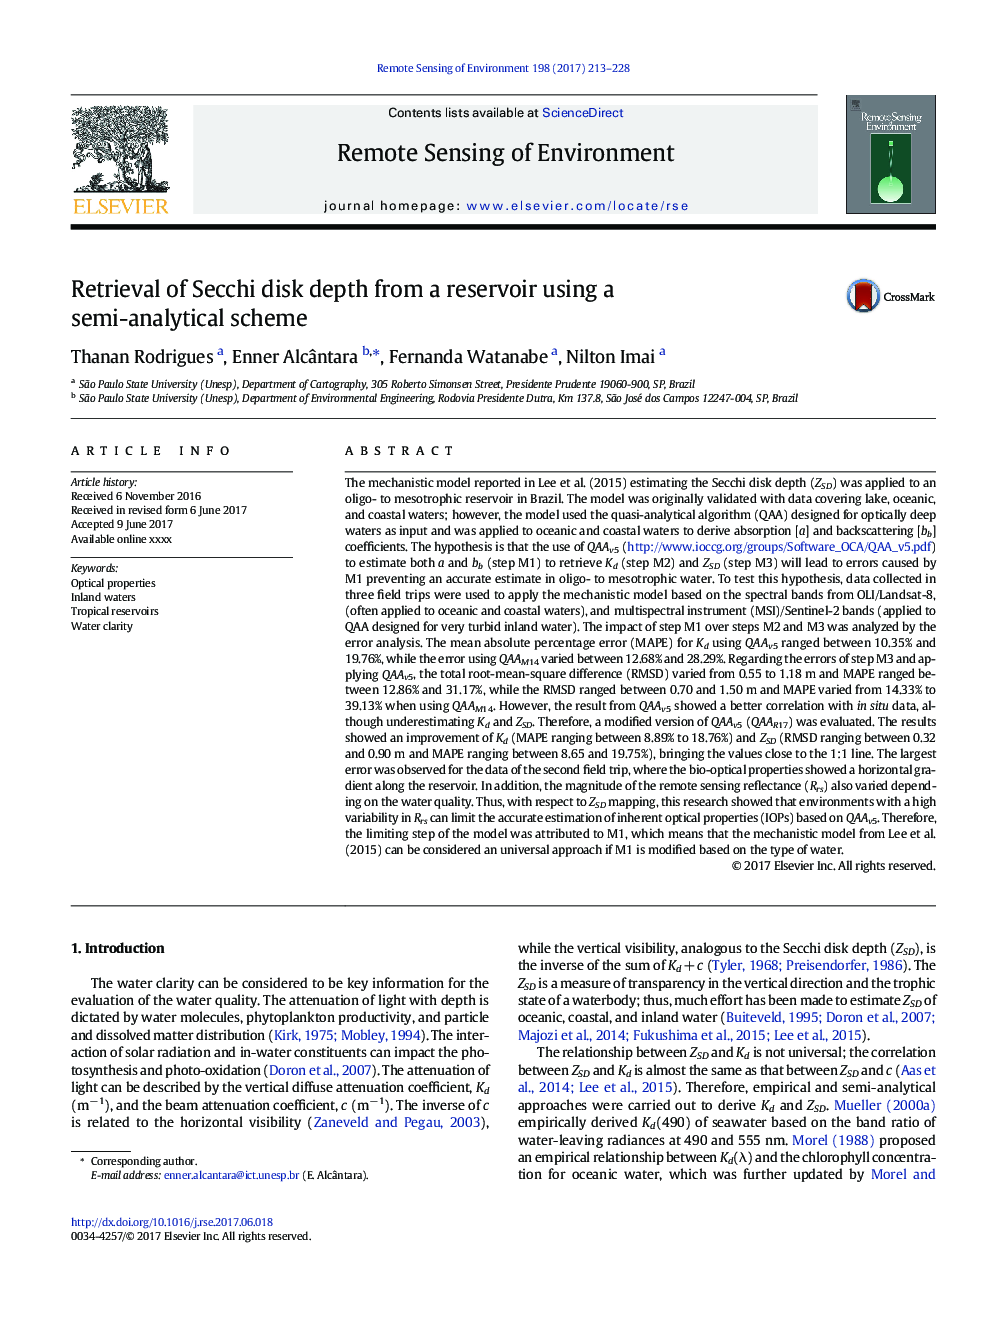 Retrieval of Secchi disk depth from a reservoir using a semi-analytical scheme